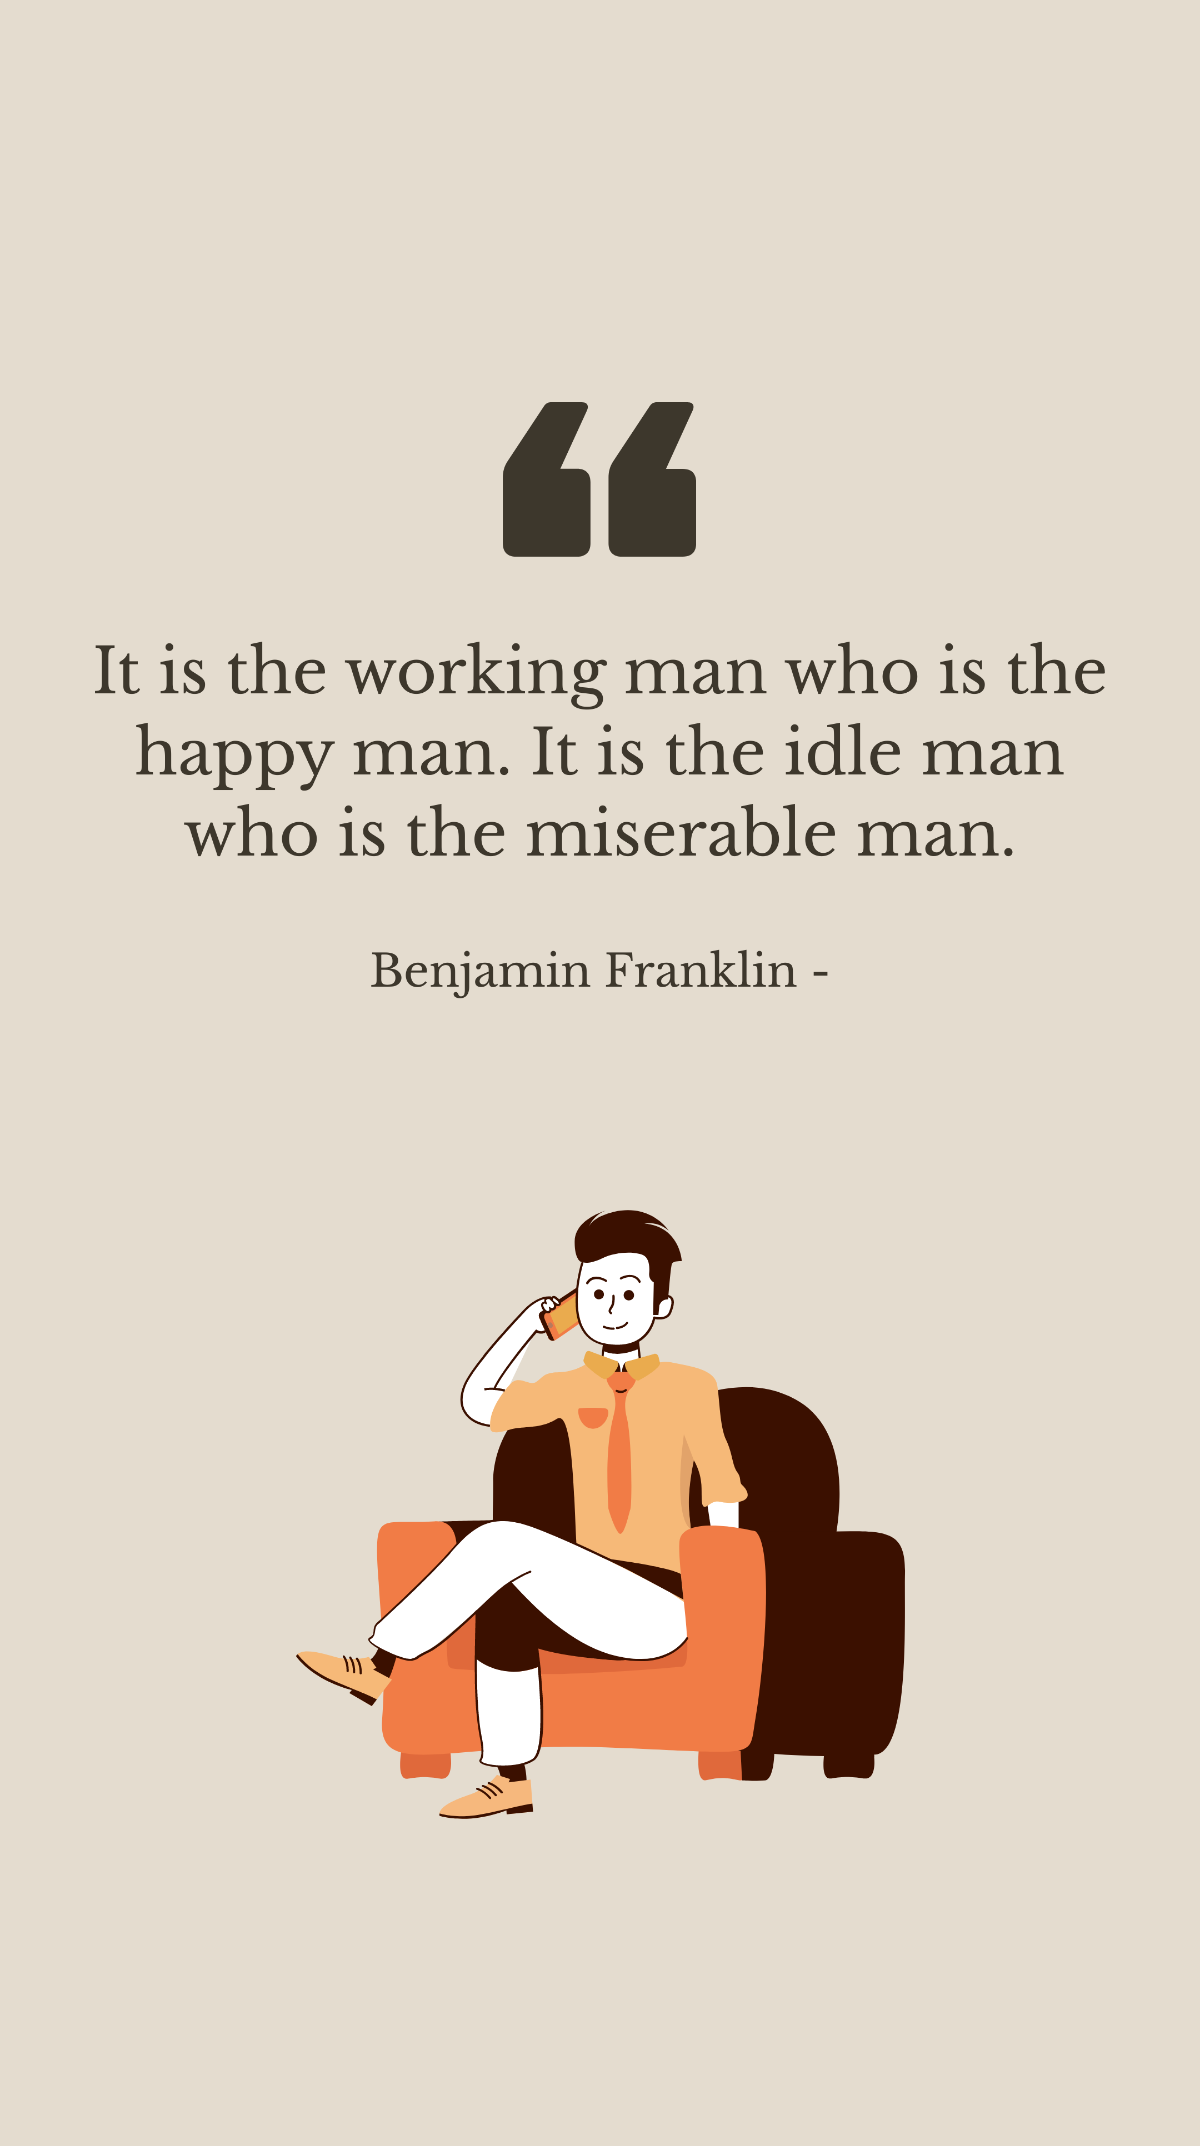 Benjamin Franklin - It is the working man who is the happy man. It is the idle man who is the miserable man. Template